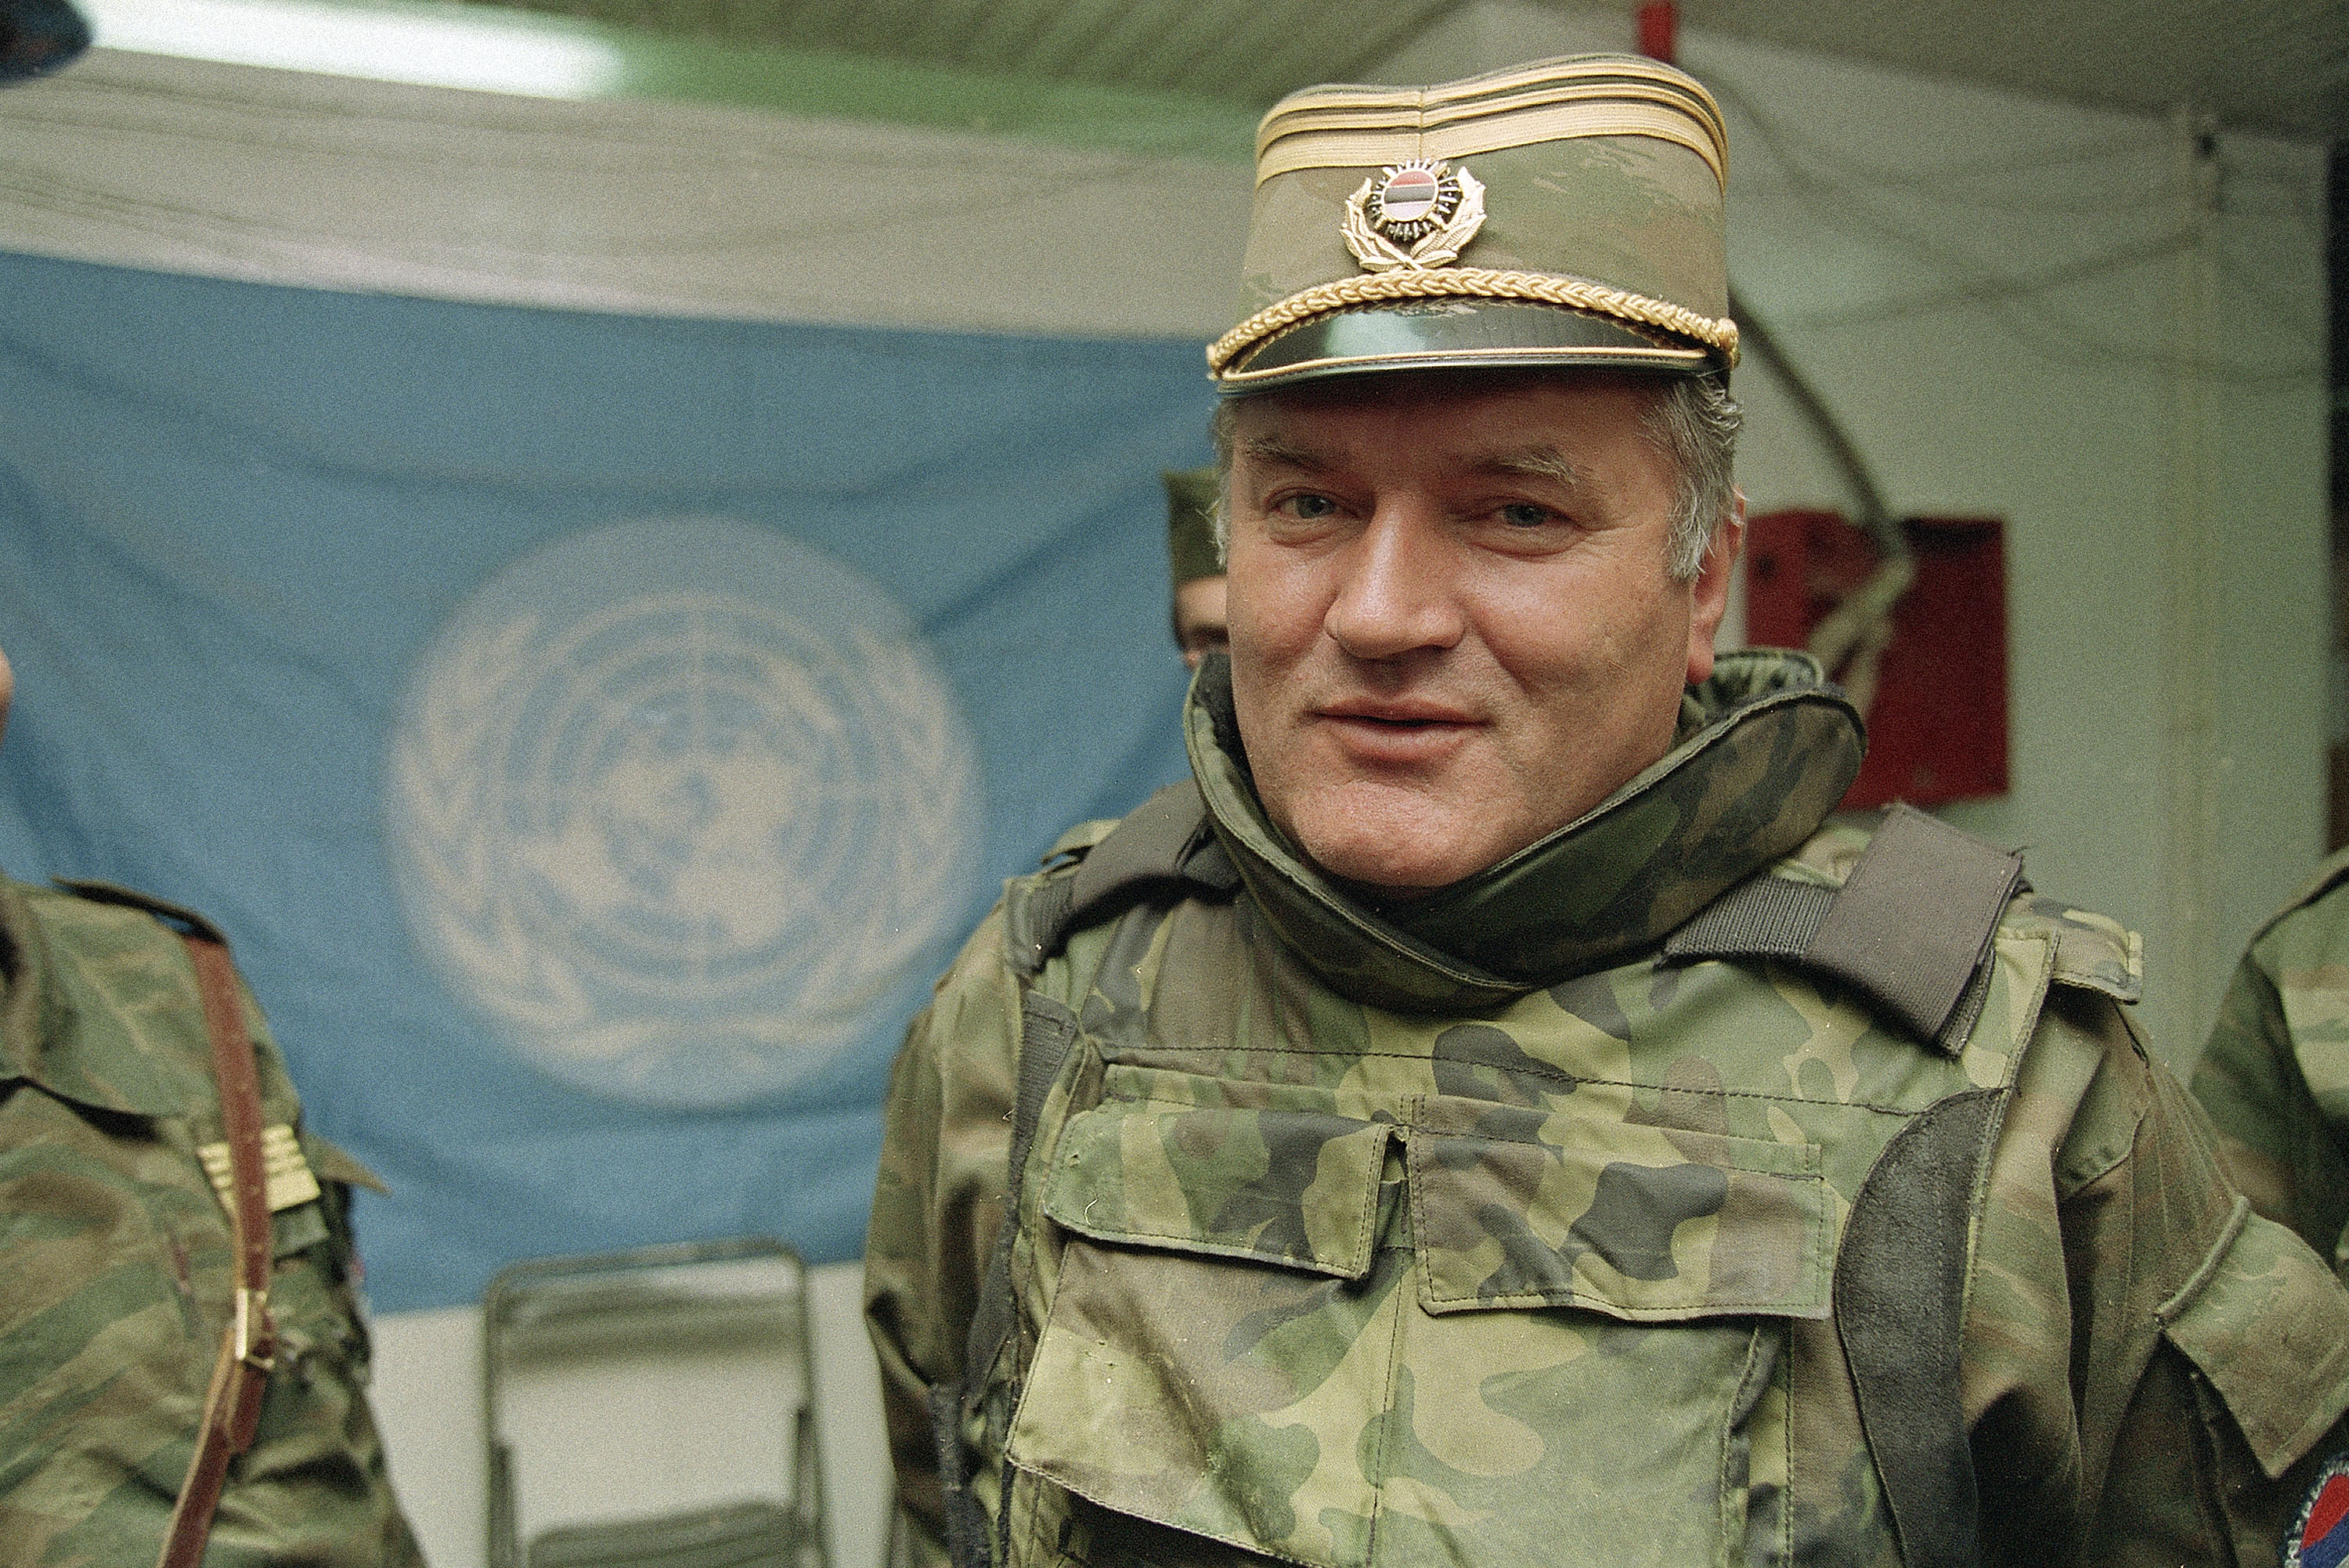 Ratko Mladic, Europe's most wanted war crimes fugitive, arrested in Serbia - The Blade